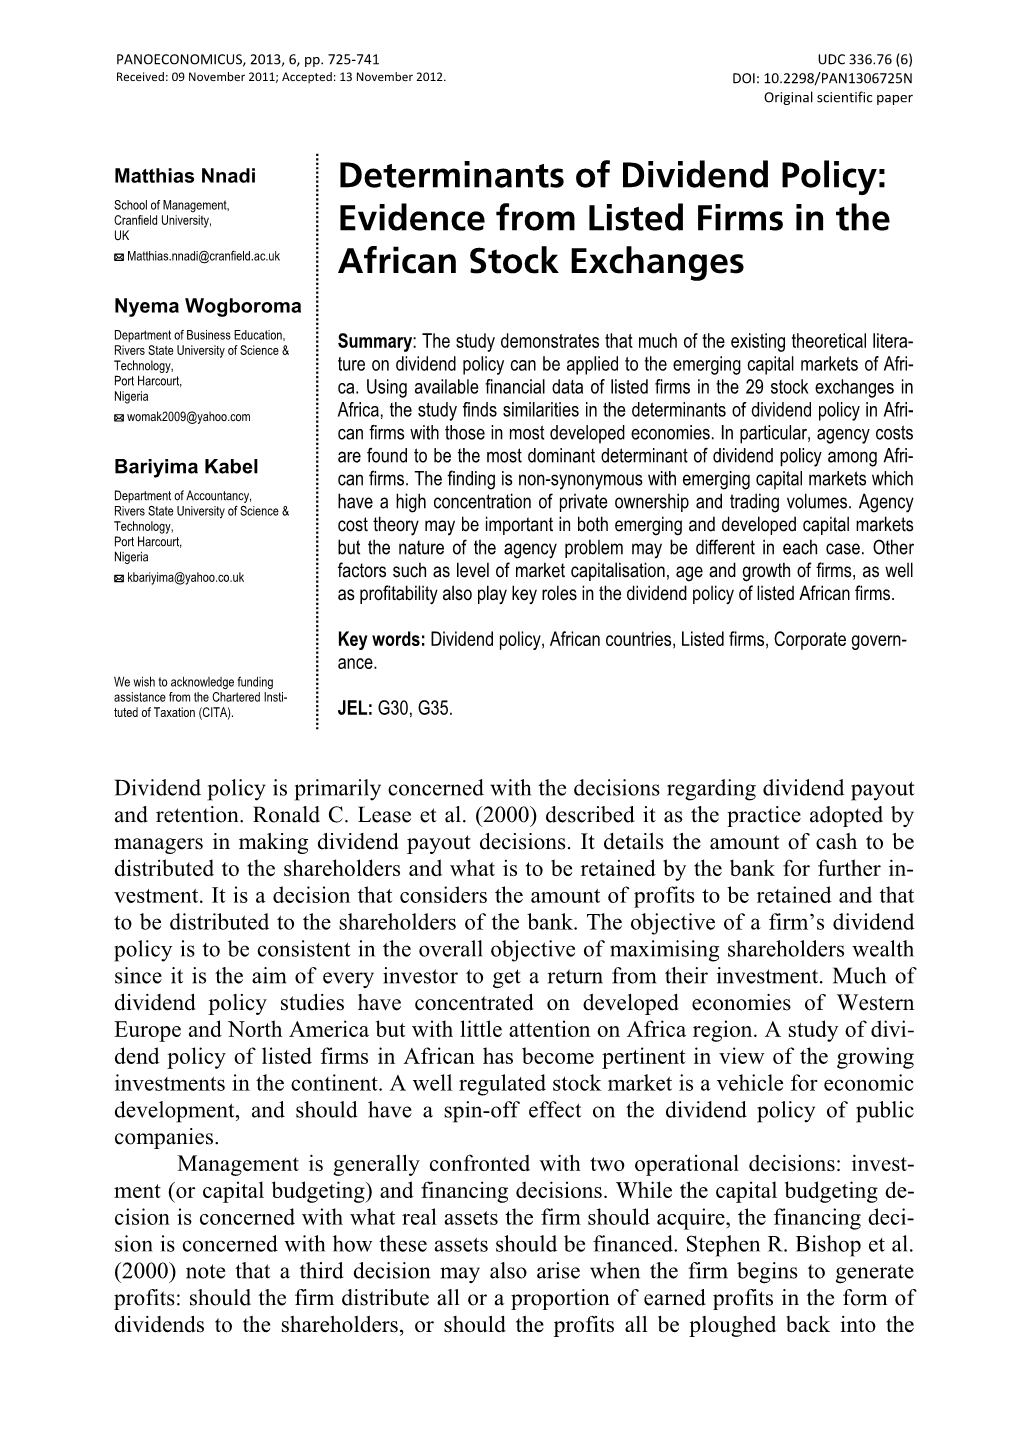 Evidence from Listed Firms in the African Stock Exchanges 727